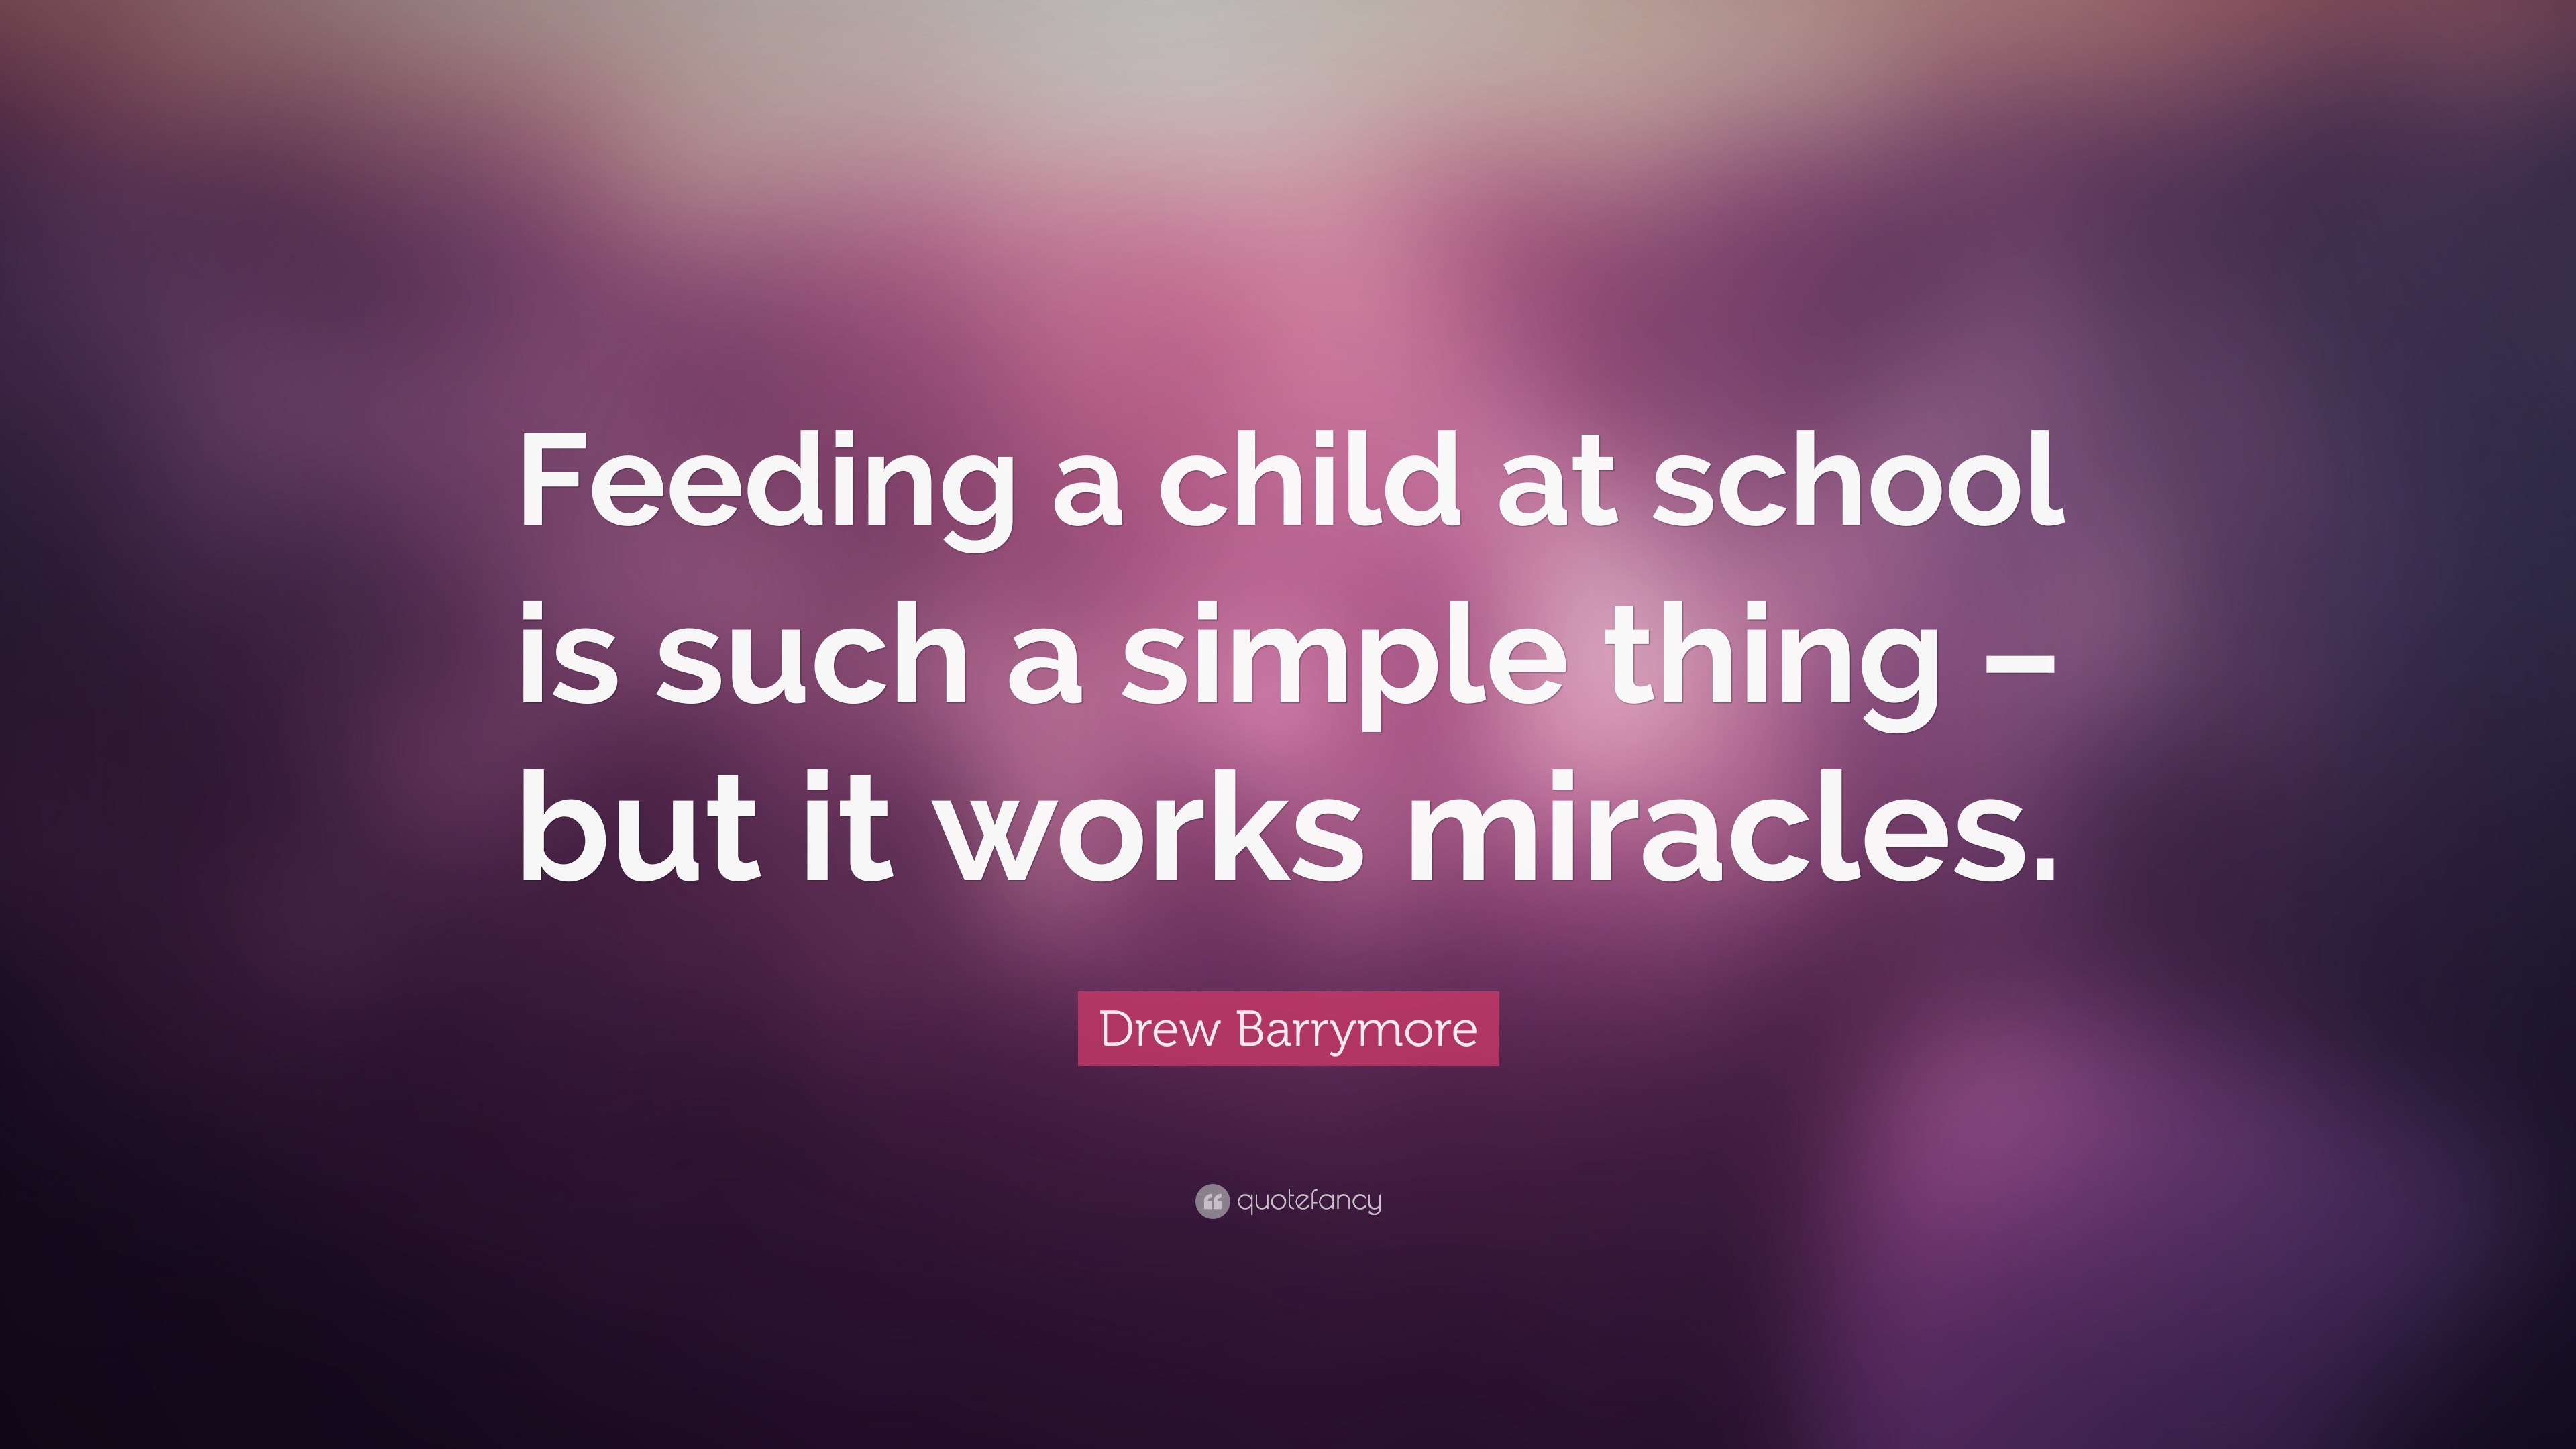 Drew Barrymore Quote: “Feeding a child at school is such a simple thing